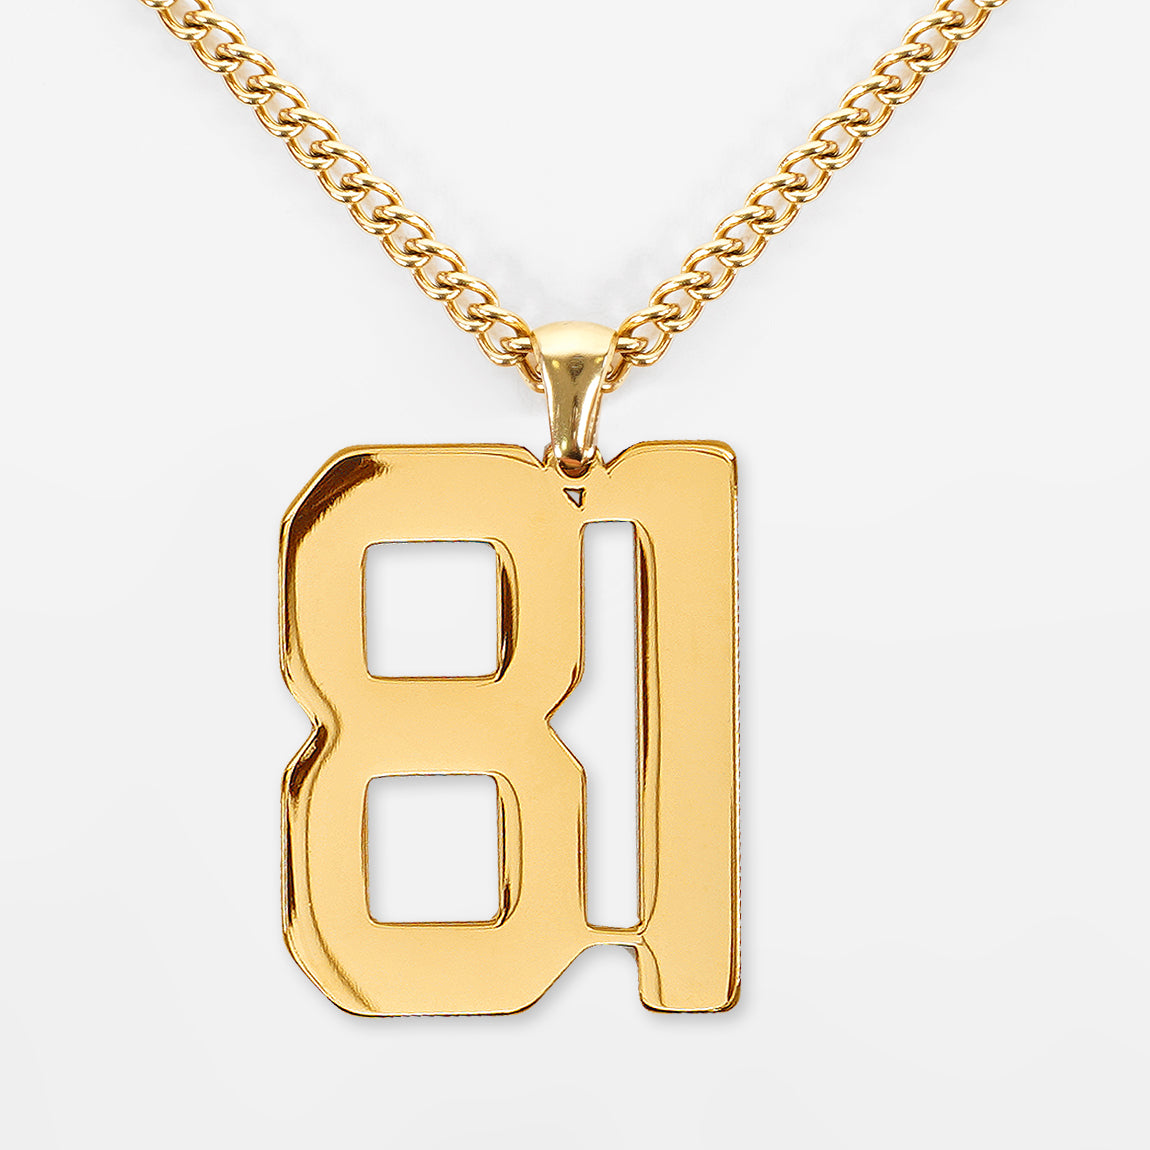 81 Number Pendant with Chain Necklace - Gold Plated Stainless Steel